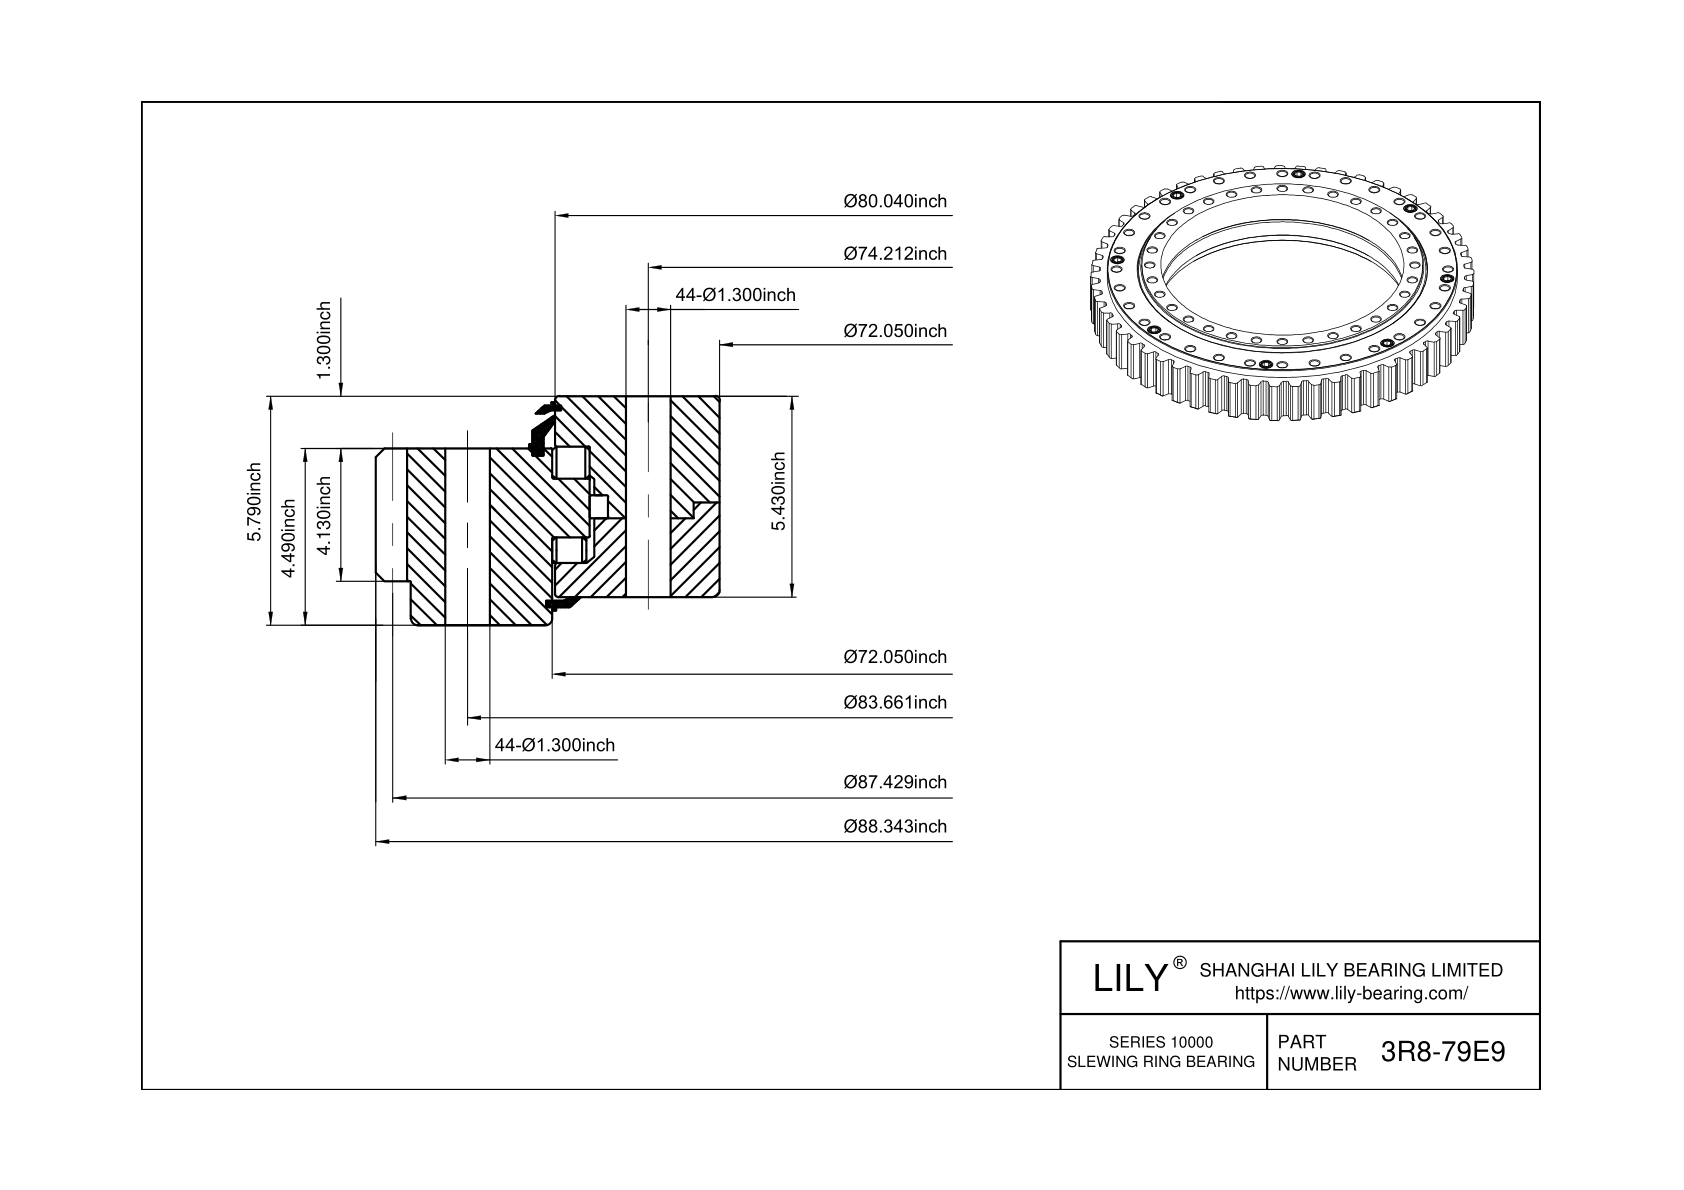 3R8-79E9 Three-Row Cross Roller Slewing Ring Bearing cad drawing